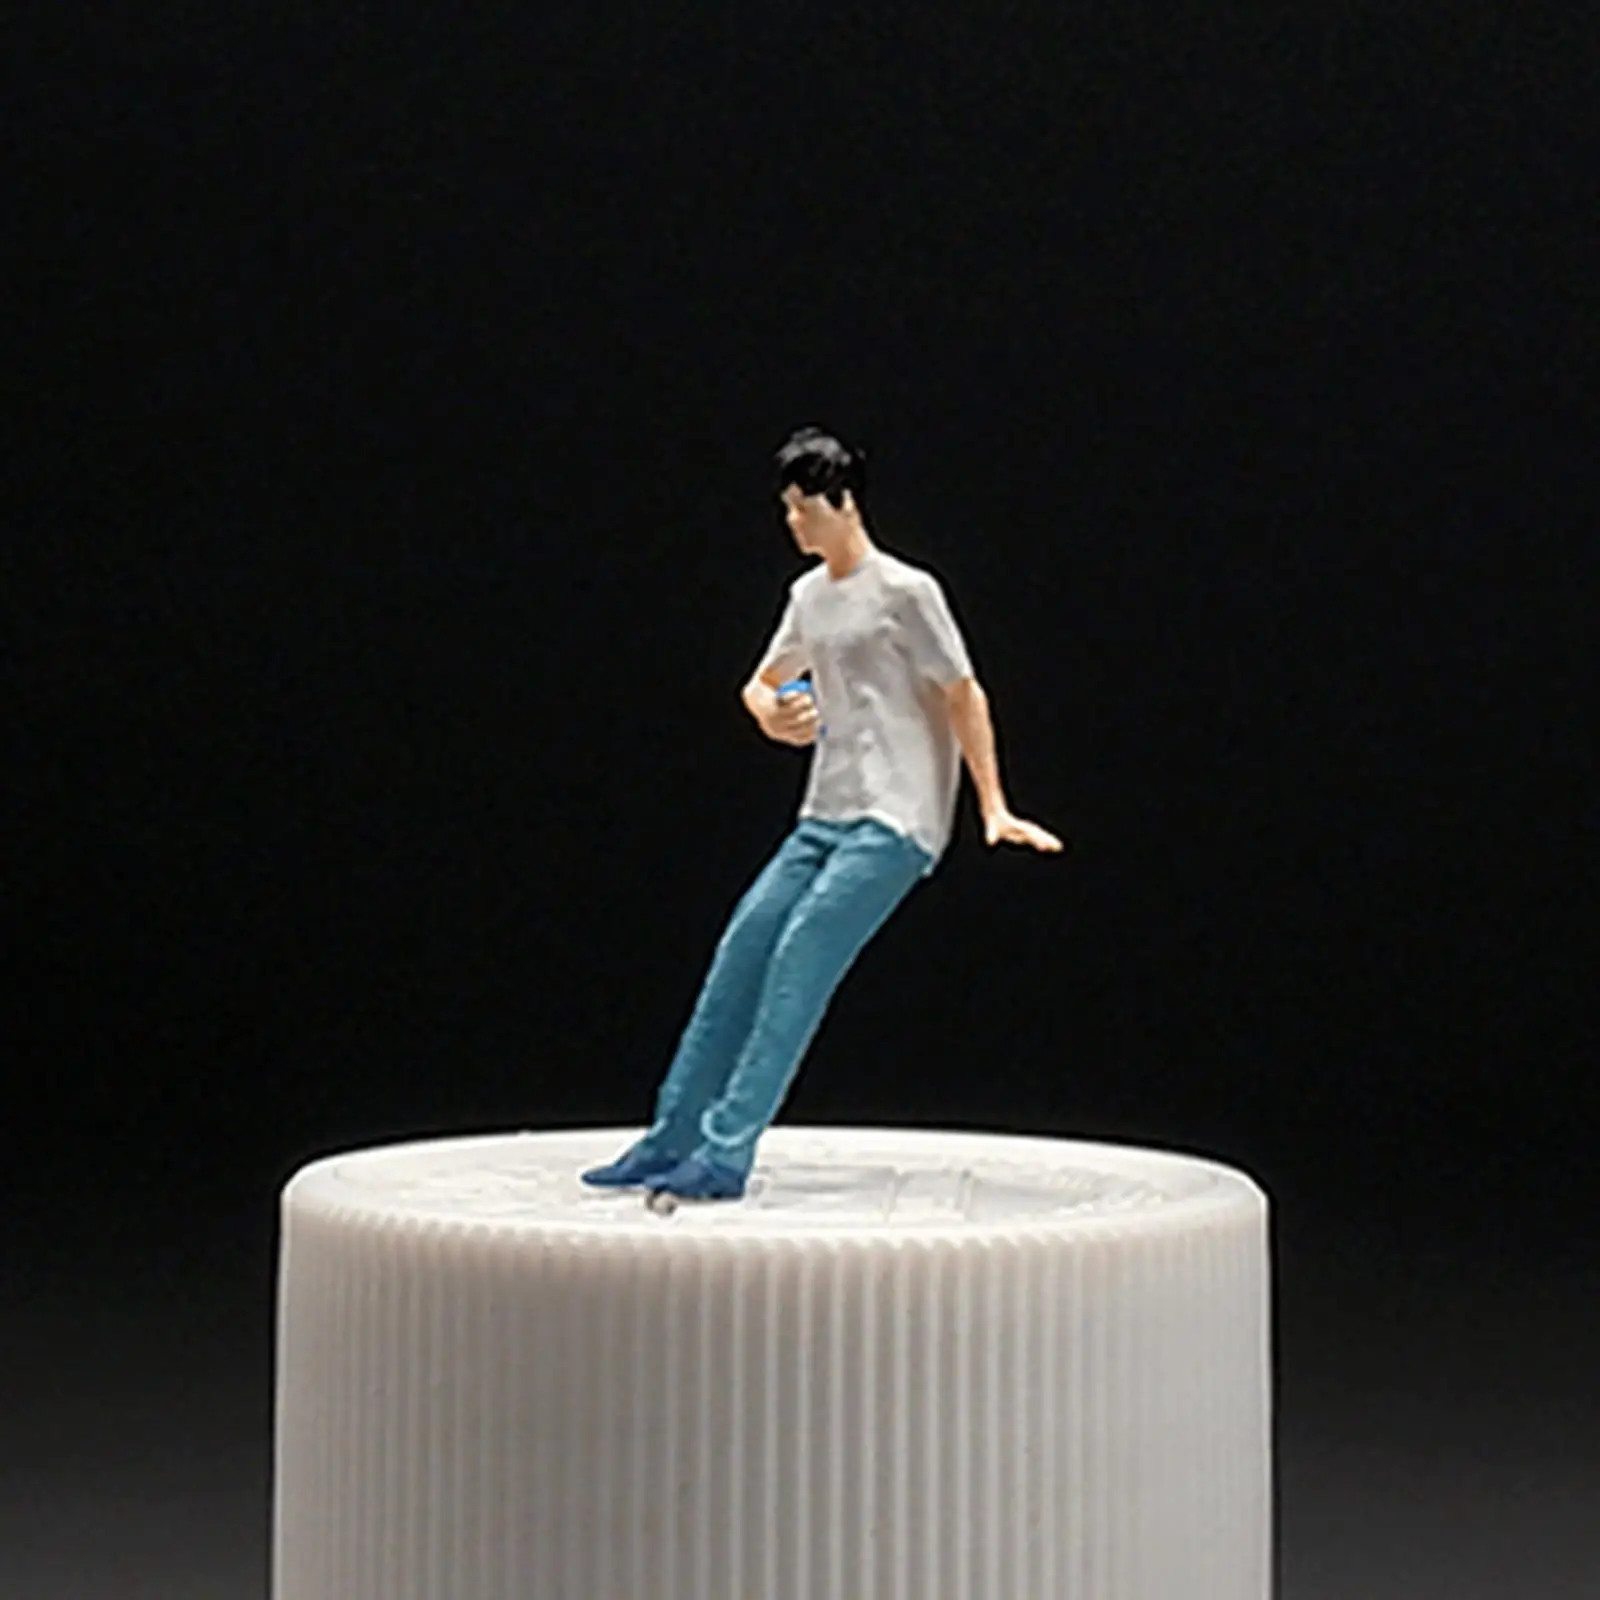 1:64 People Figures Tiny People Model DIY Crafts White T Shirt Man for Miniature Scene Dollhouse Diorama Ornament Accessories